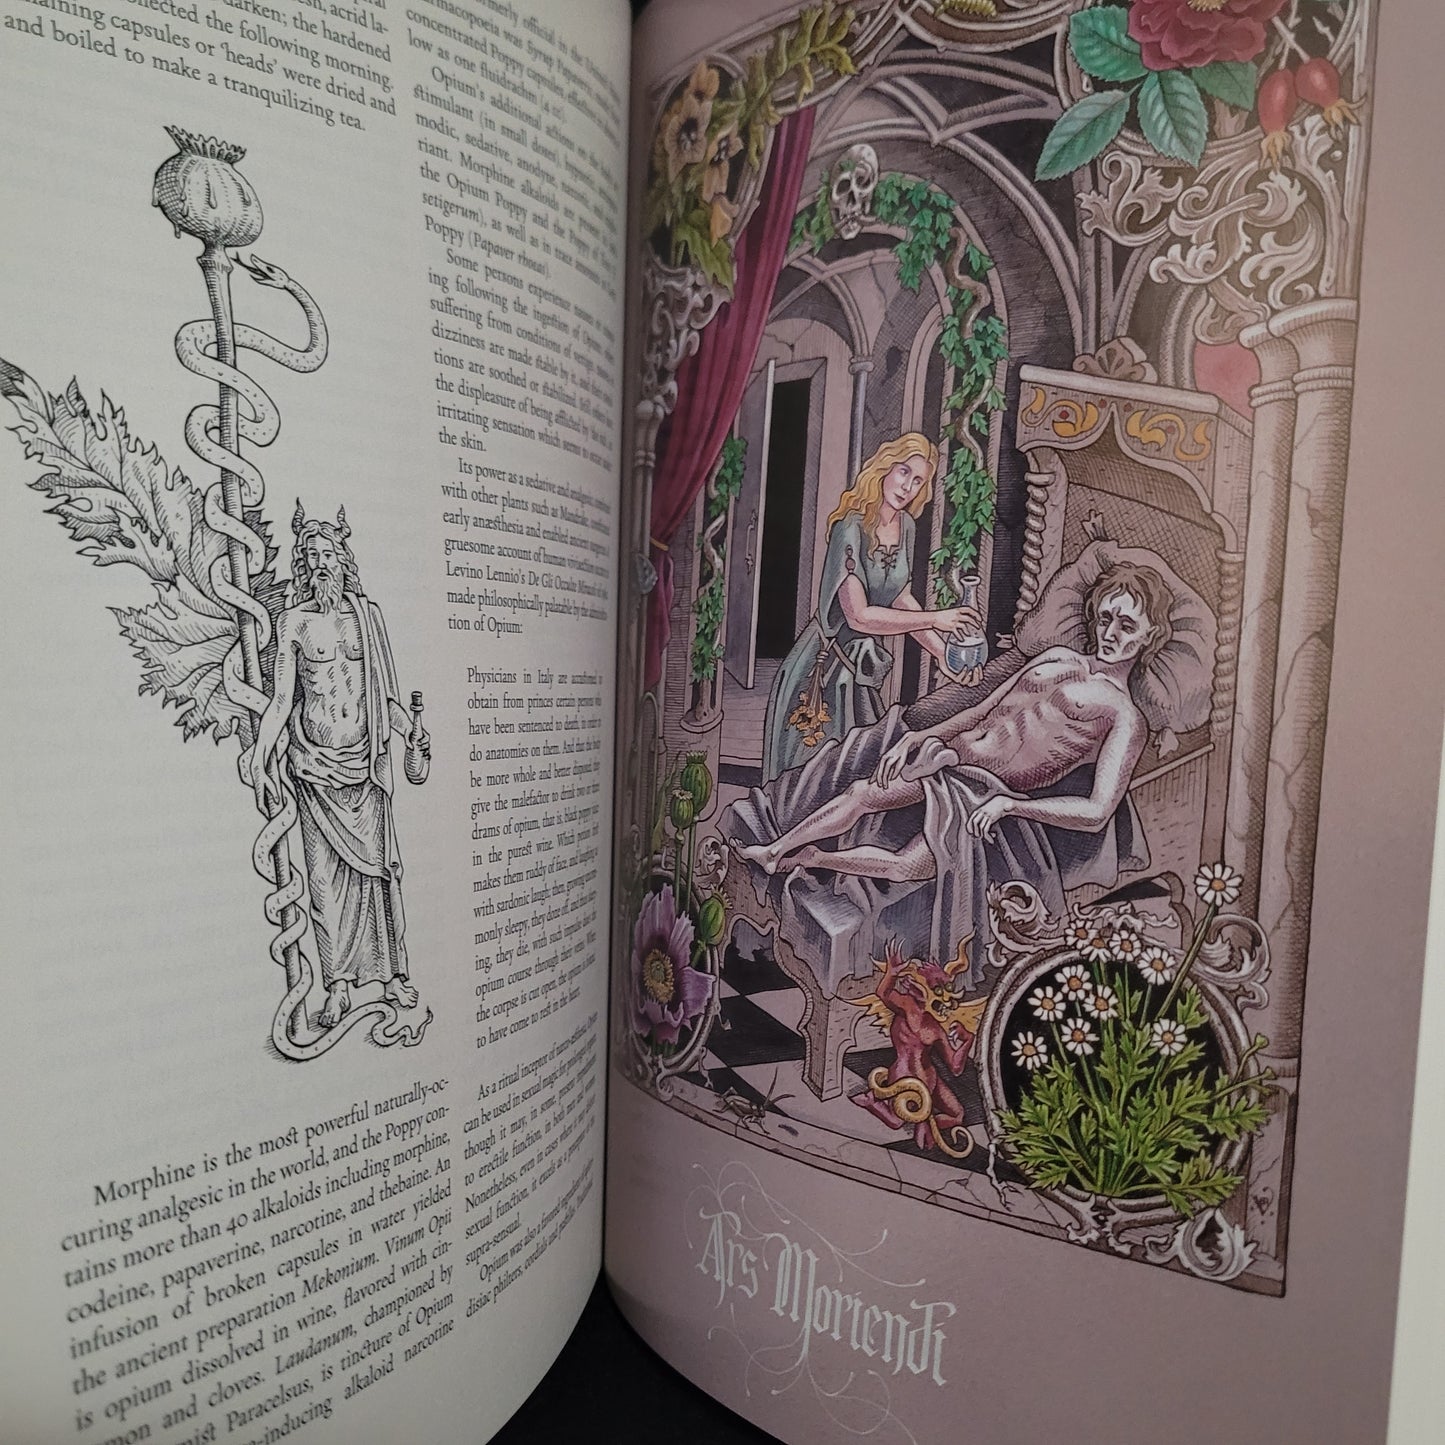 The Green Mysteries: An Occult Herbarium by Daniel A. Schulke with Illustrations by Benjamin A. Vierling (Three Hands Press, 2022) Paperback Edition